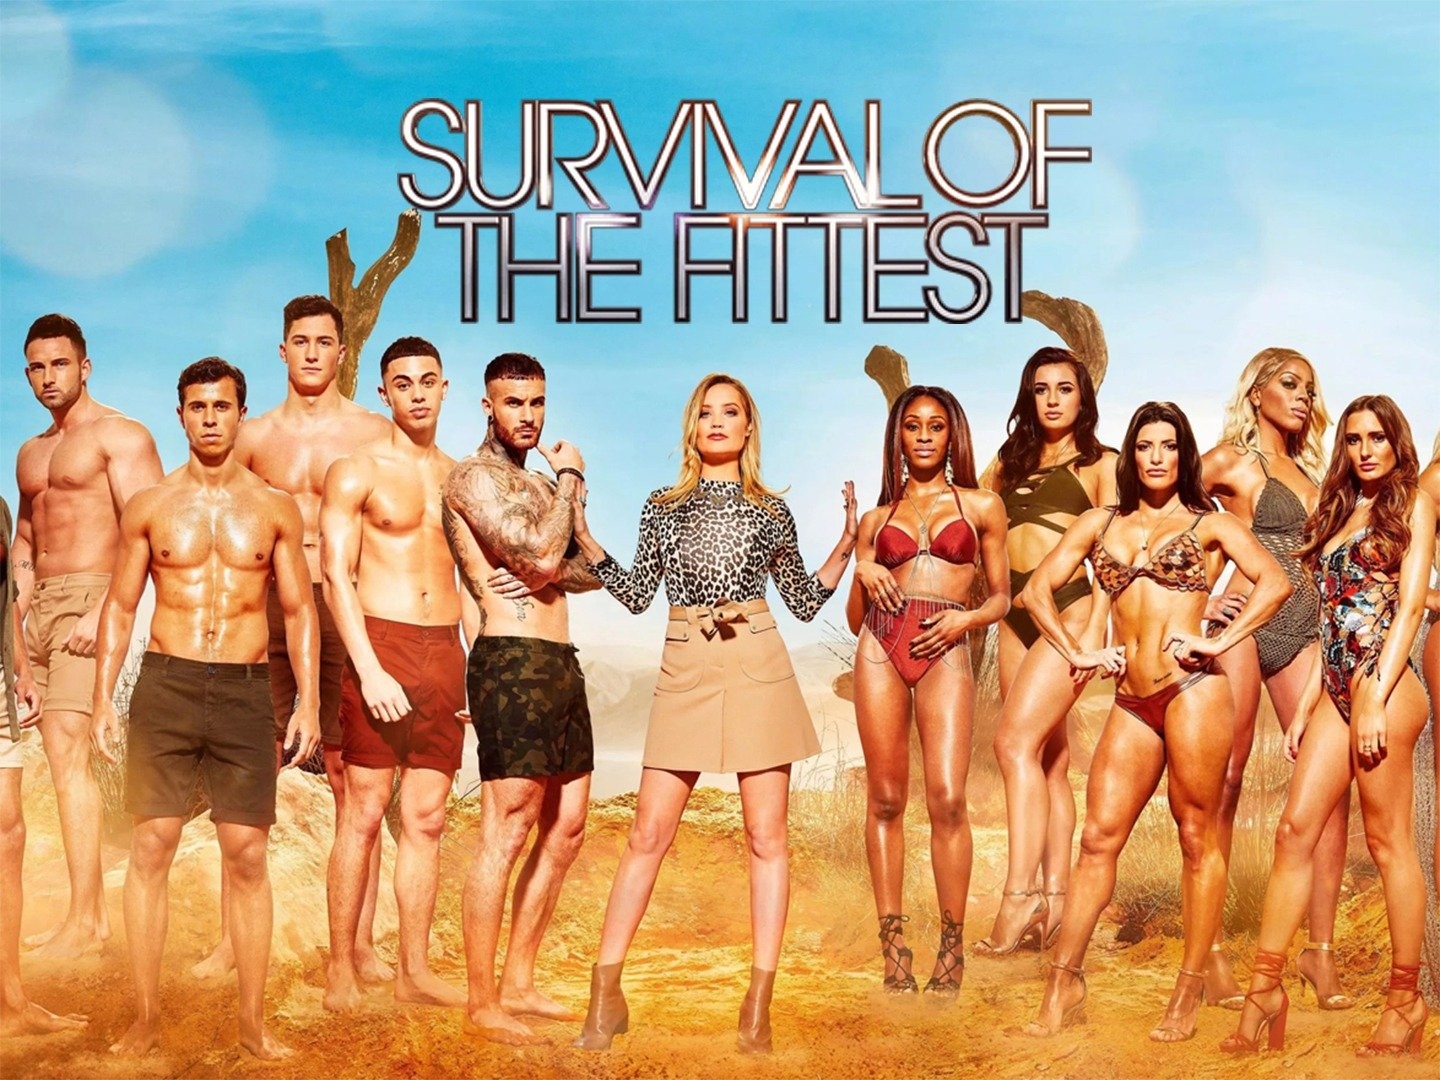 Survival of the Fittest (TV series) - Wikipedia